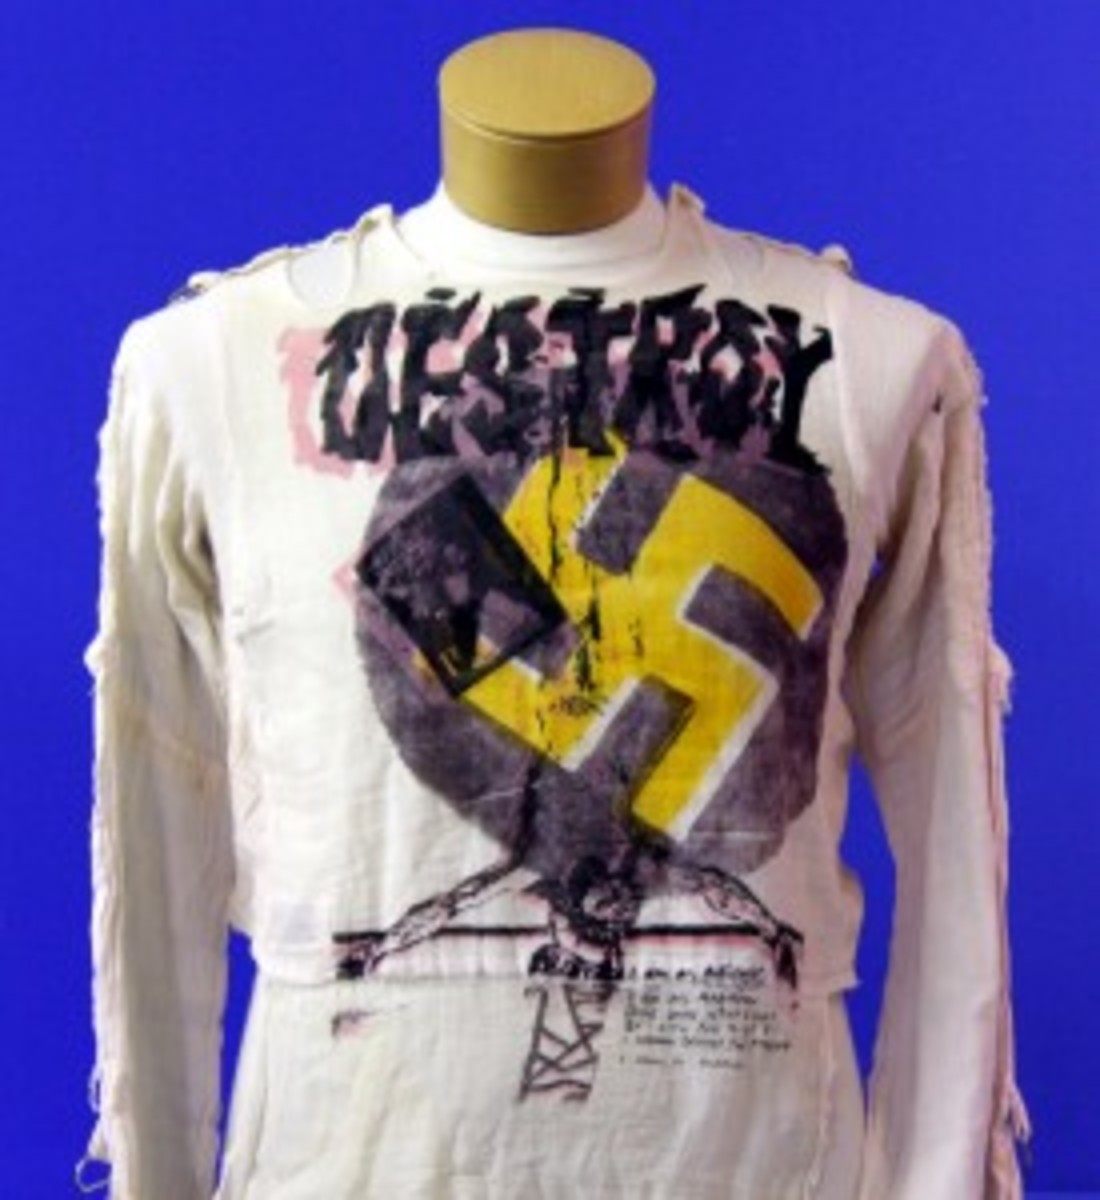  Seditionaries McLaren and Westwood original 'Destroy' shirt. Photo courtesy Backstage Auctions.